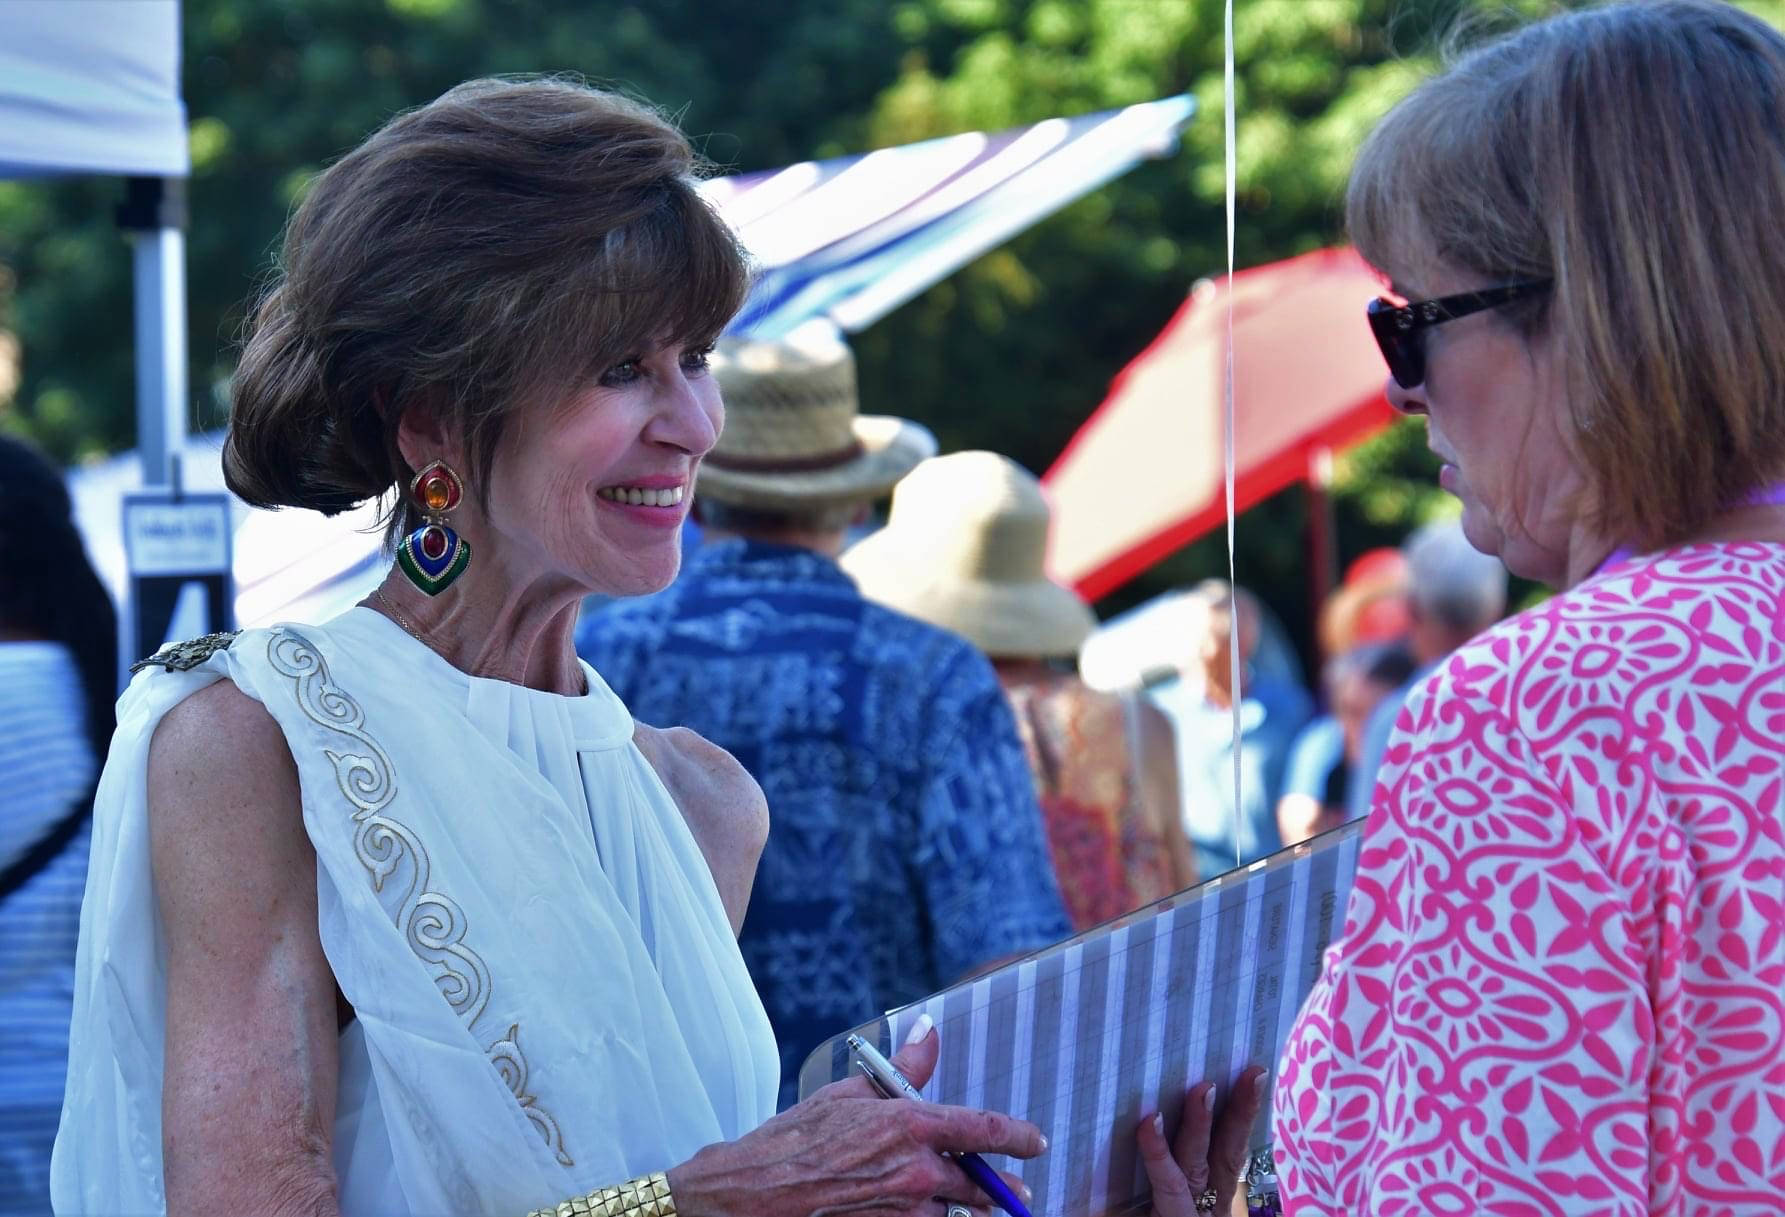 FUSION founder Peggy LaPorte greets guests at the Aug. 4 summer arts fundraiser at Dumas Bay Centre in Federal Way. Photo courtesy of Bruce Honda